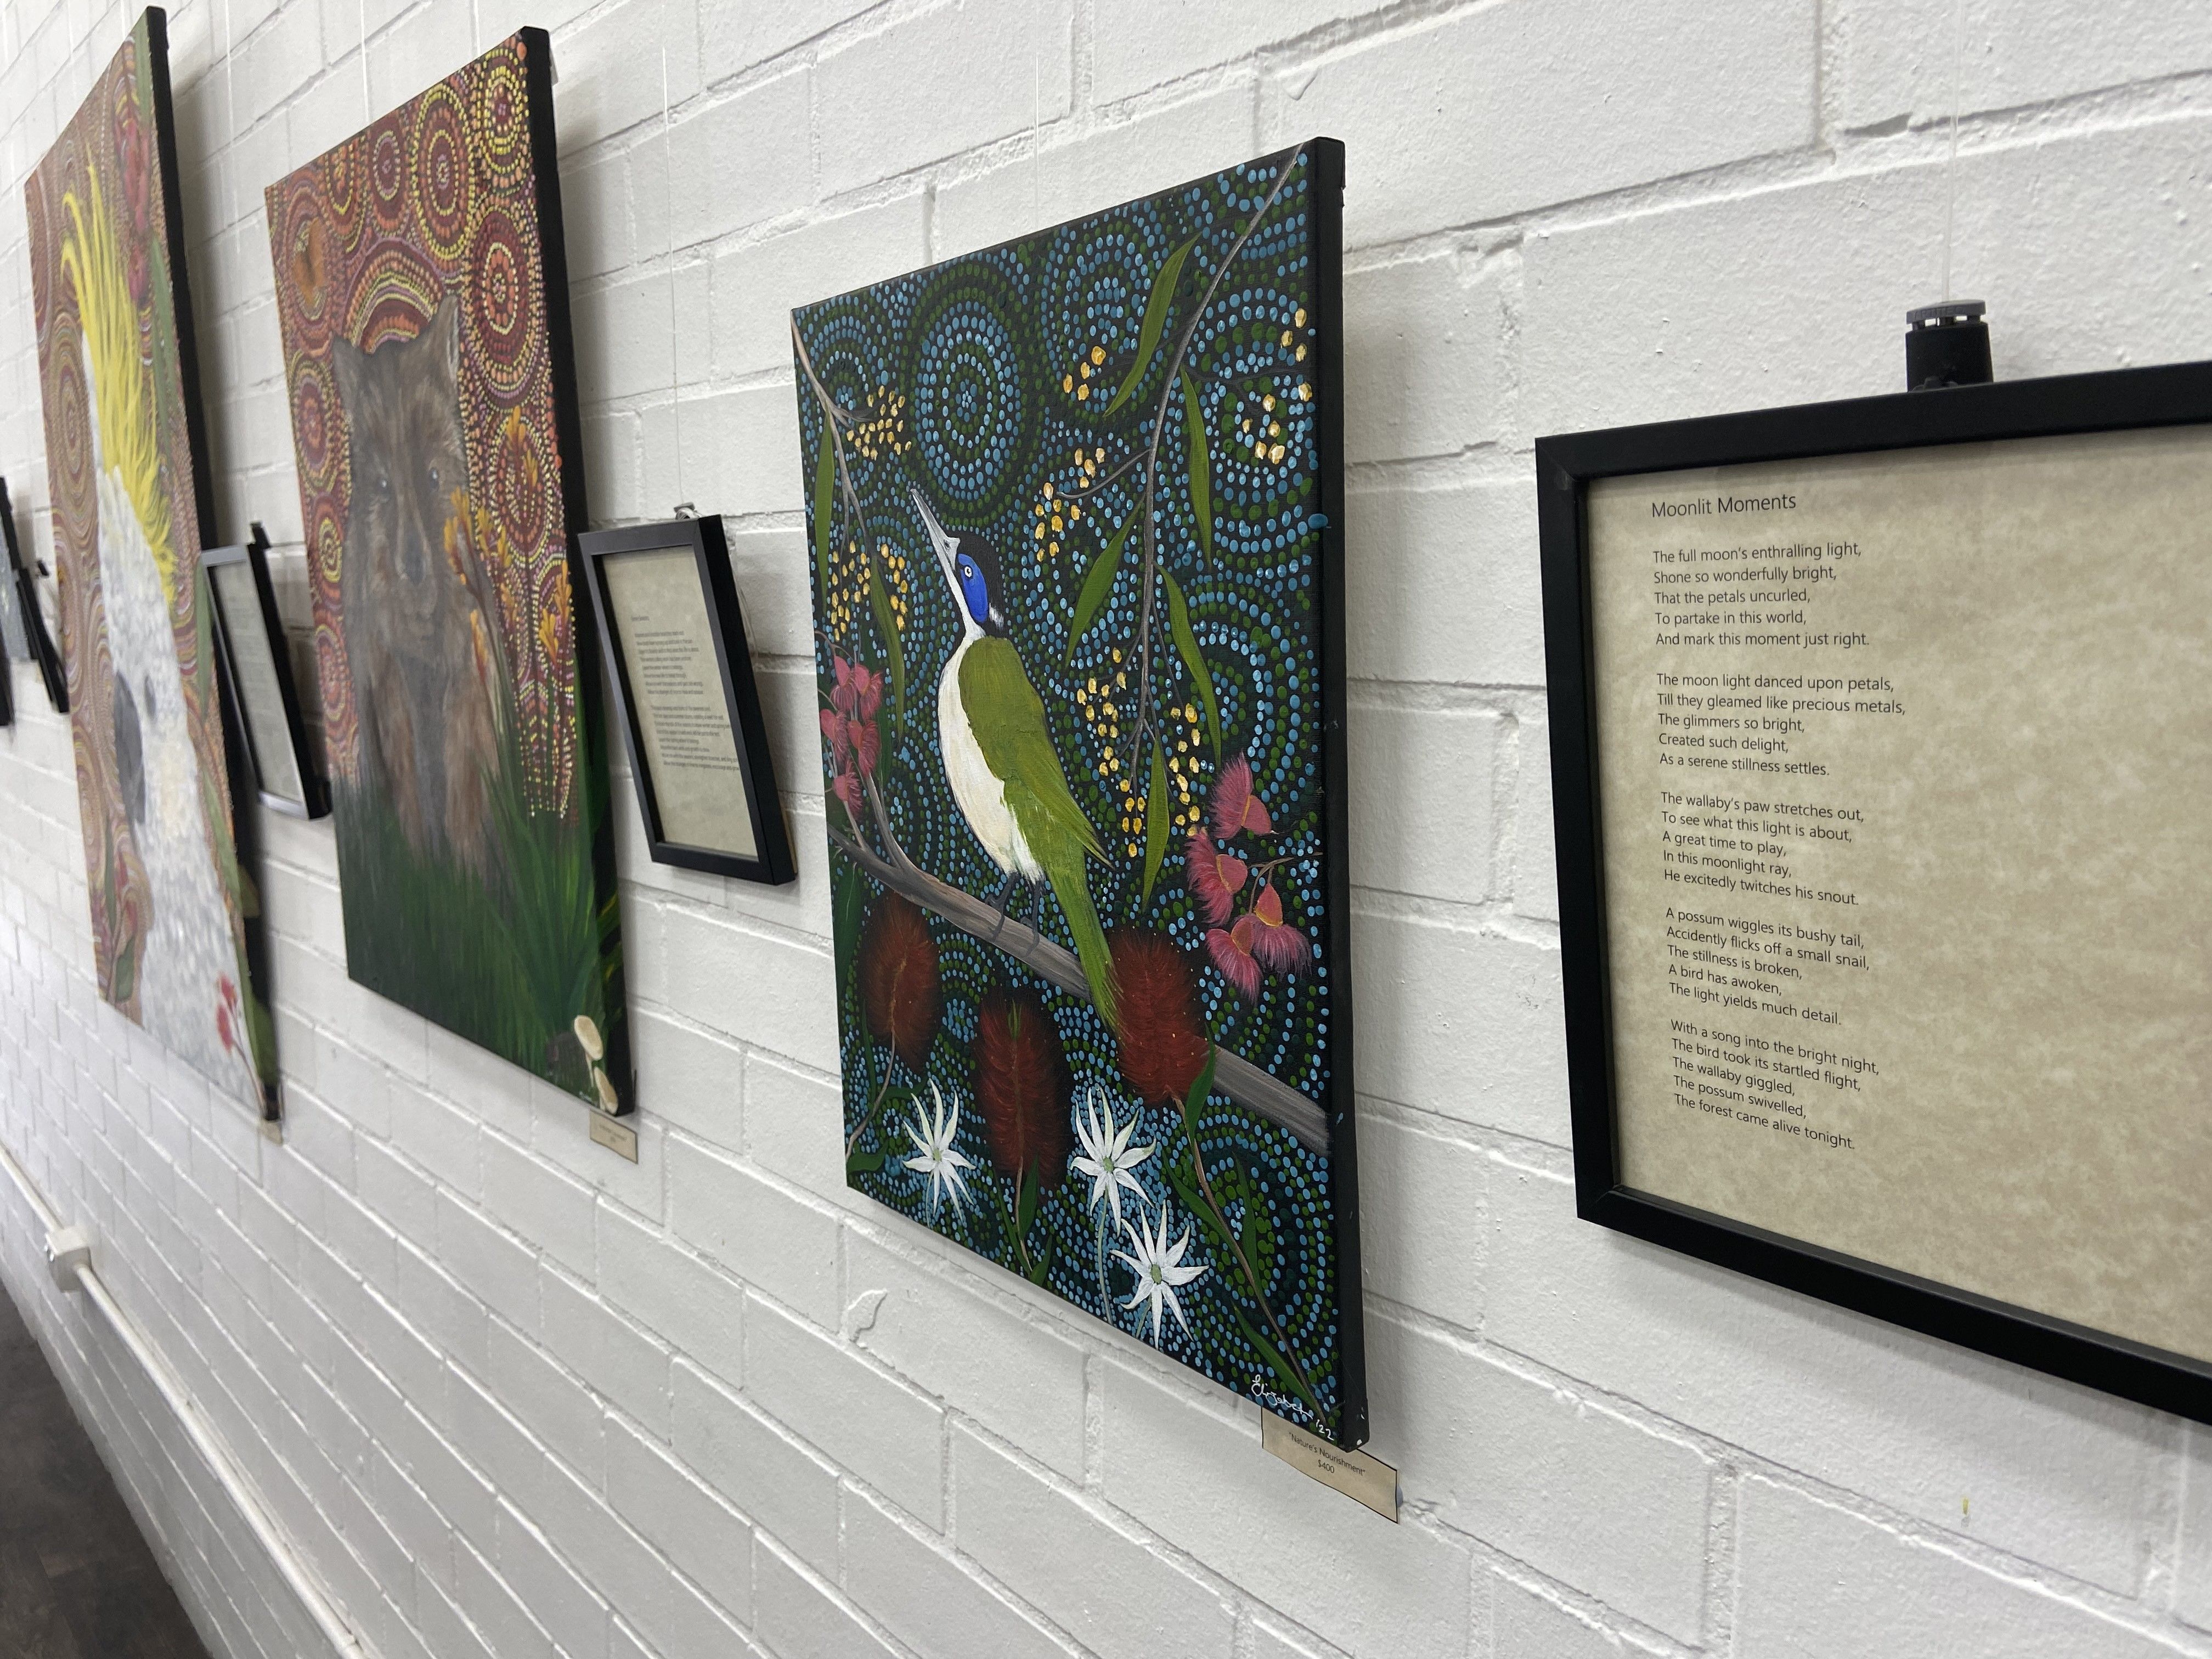 Wiradjuri artist Elizabeth Doherty's exhibition of painting My Secret Garden is on display at the Curious Rabbit in Wagga Wagga